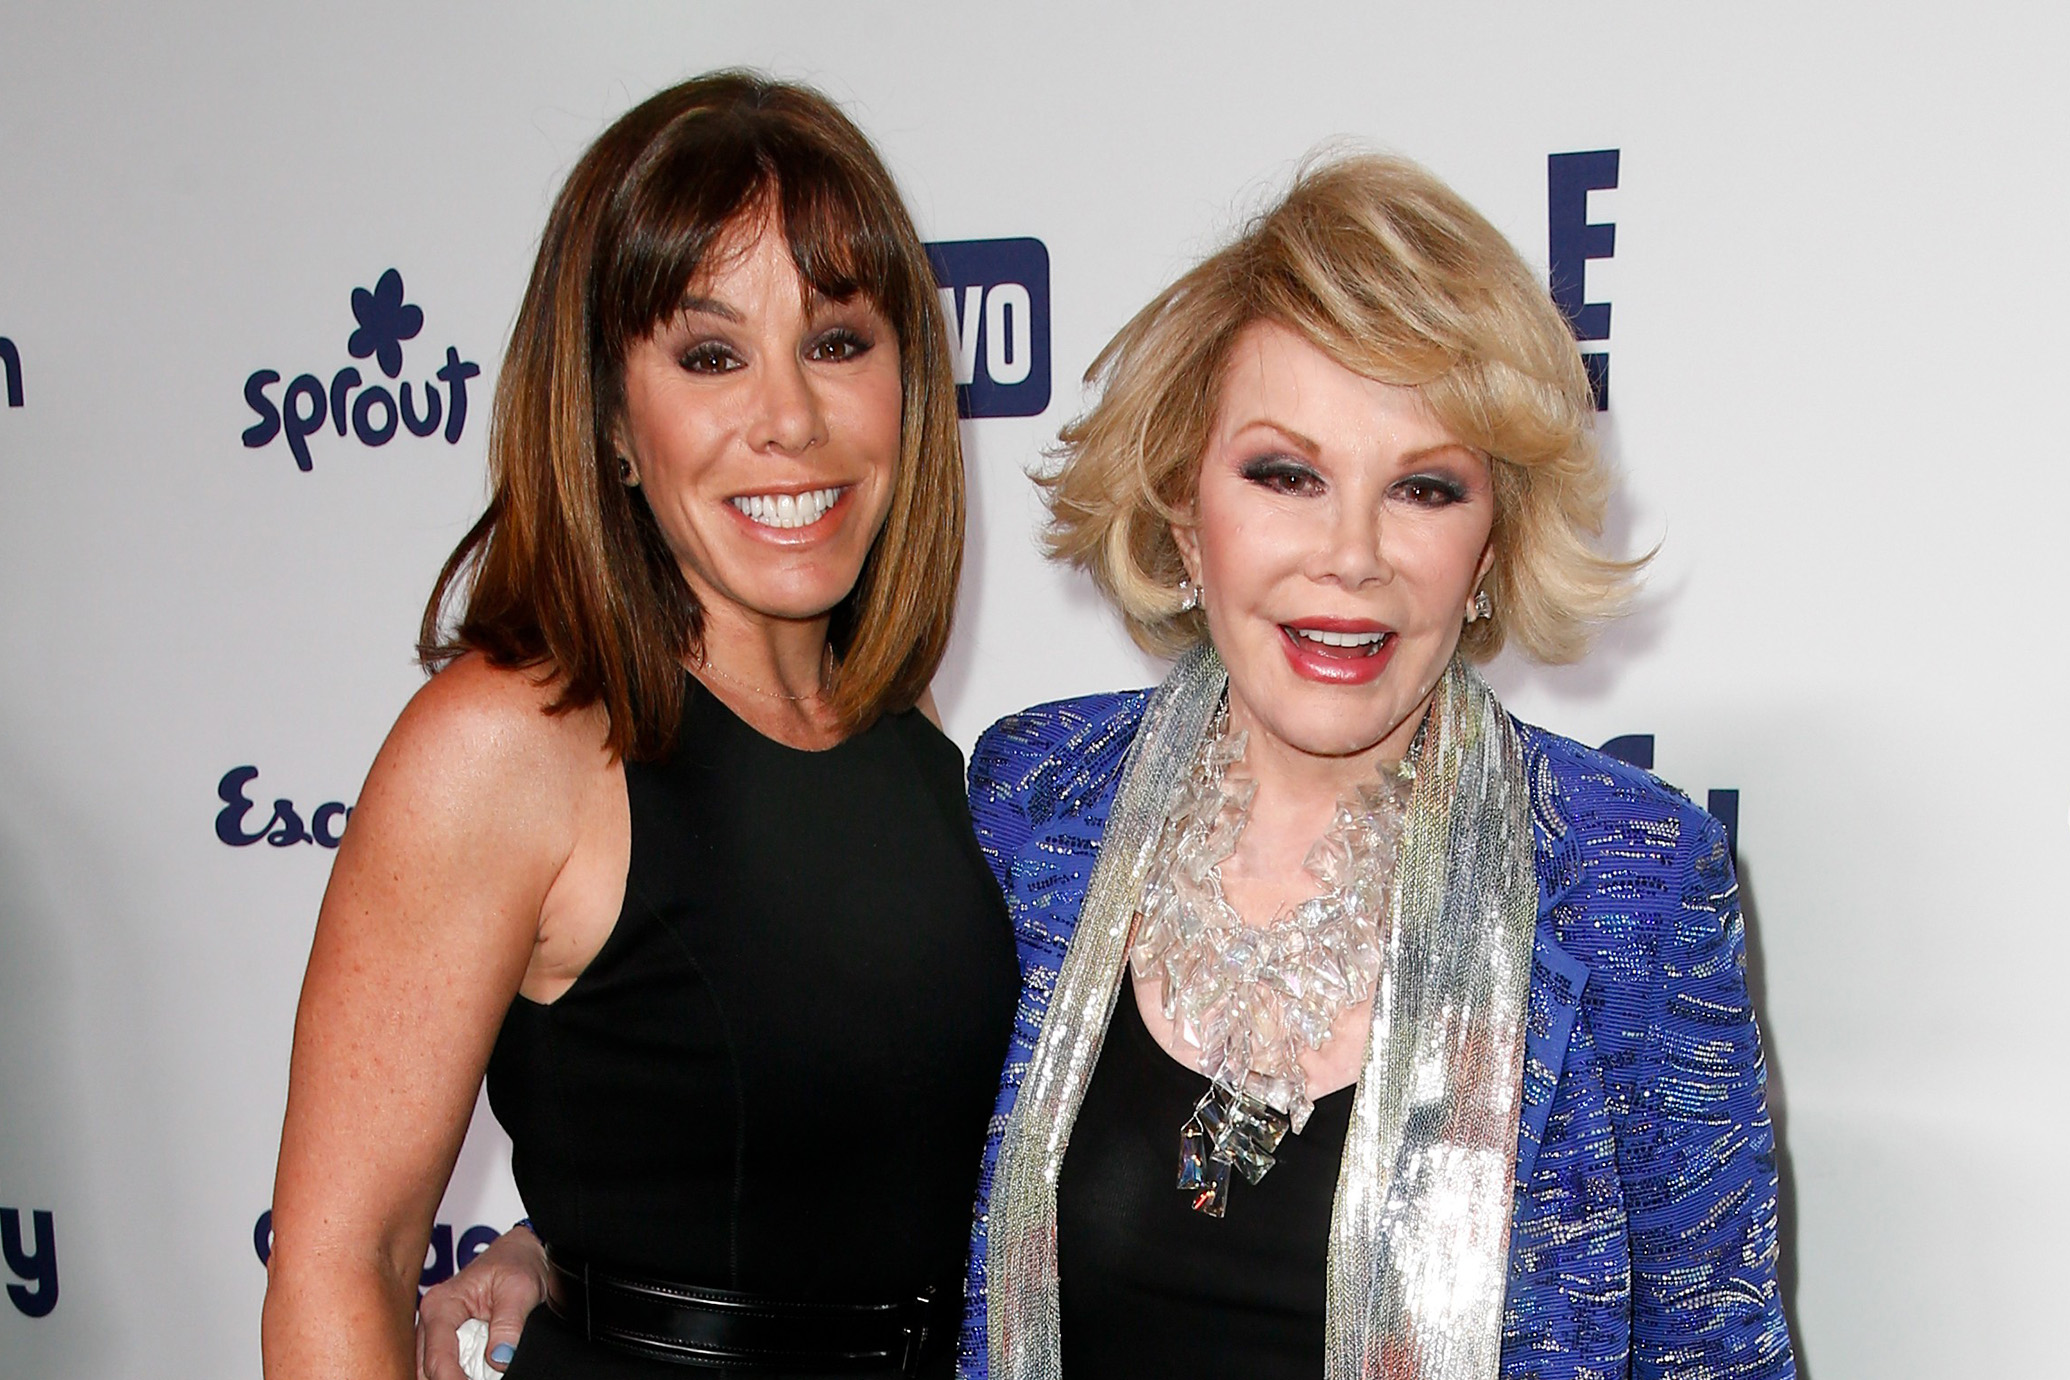 On Twitter, her daughter Melissa Rivers posted a brief tribute to her mothe...